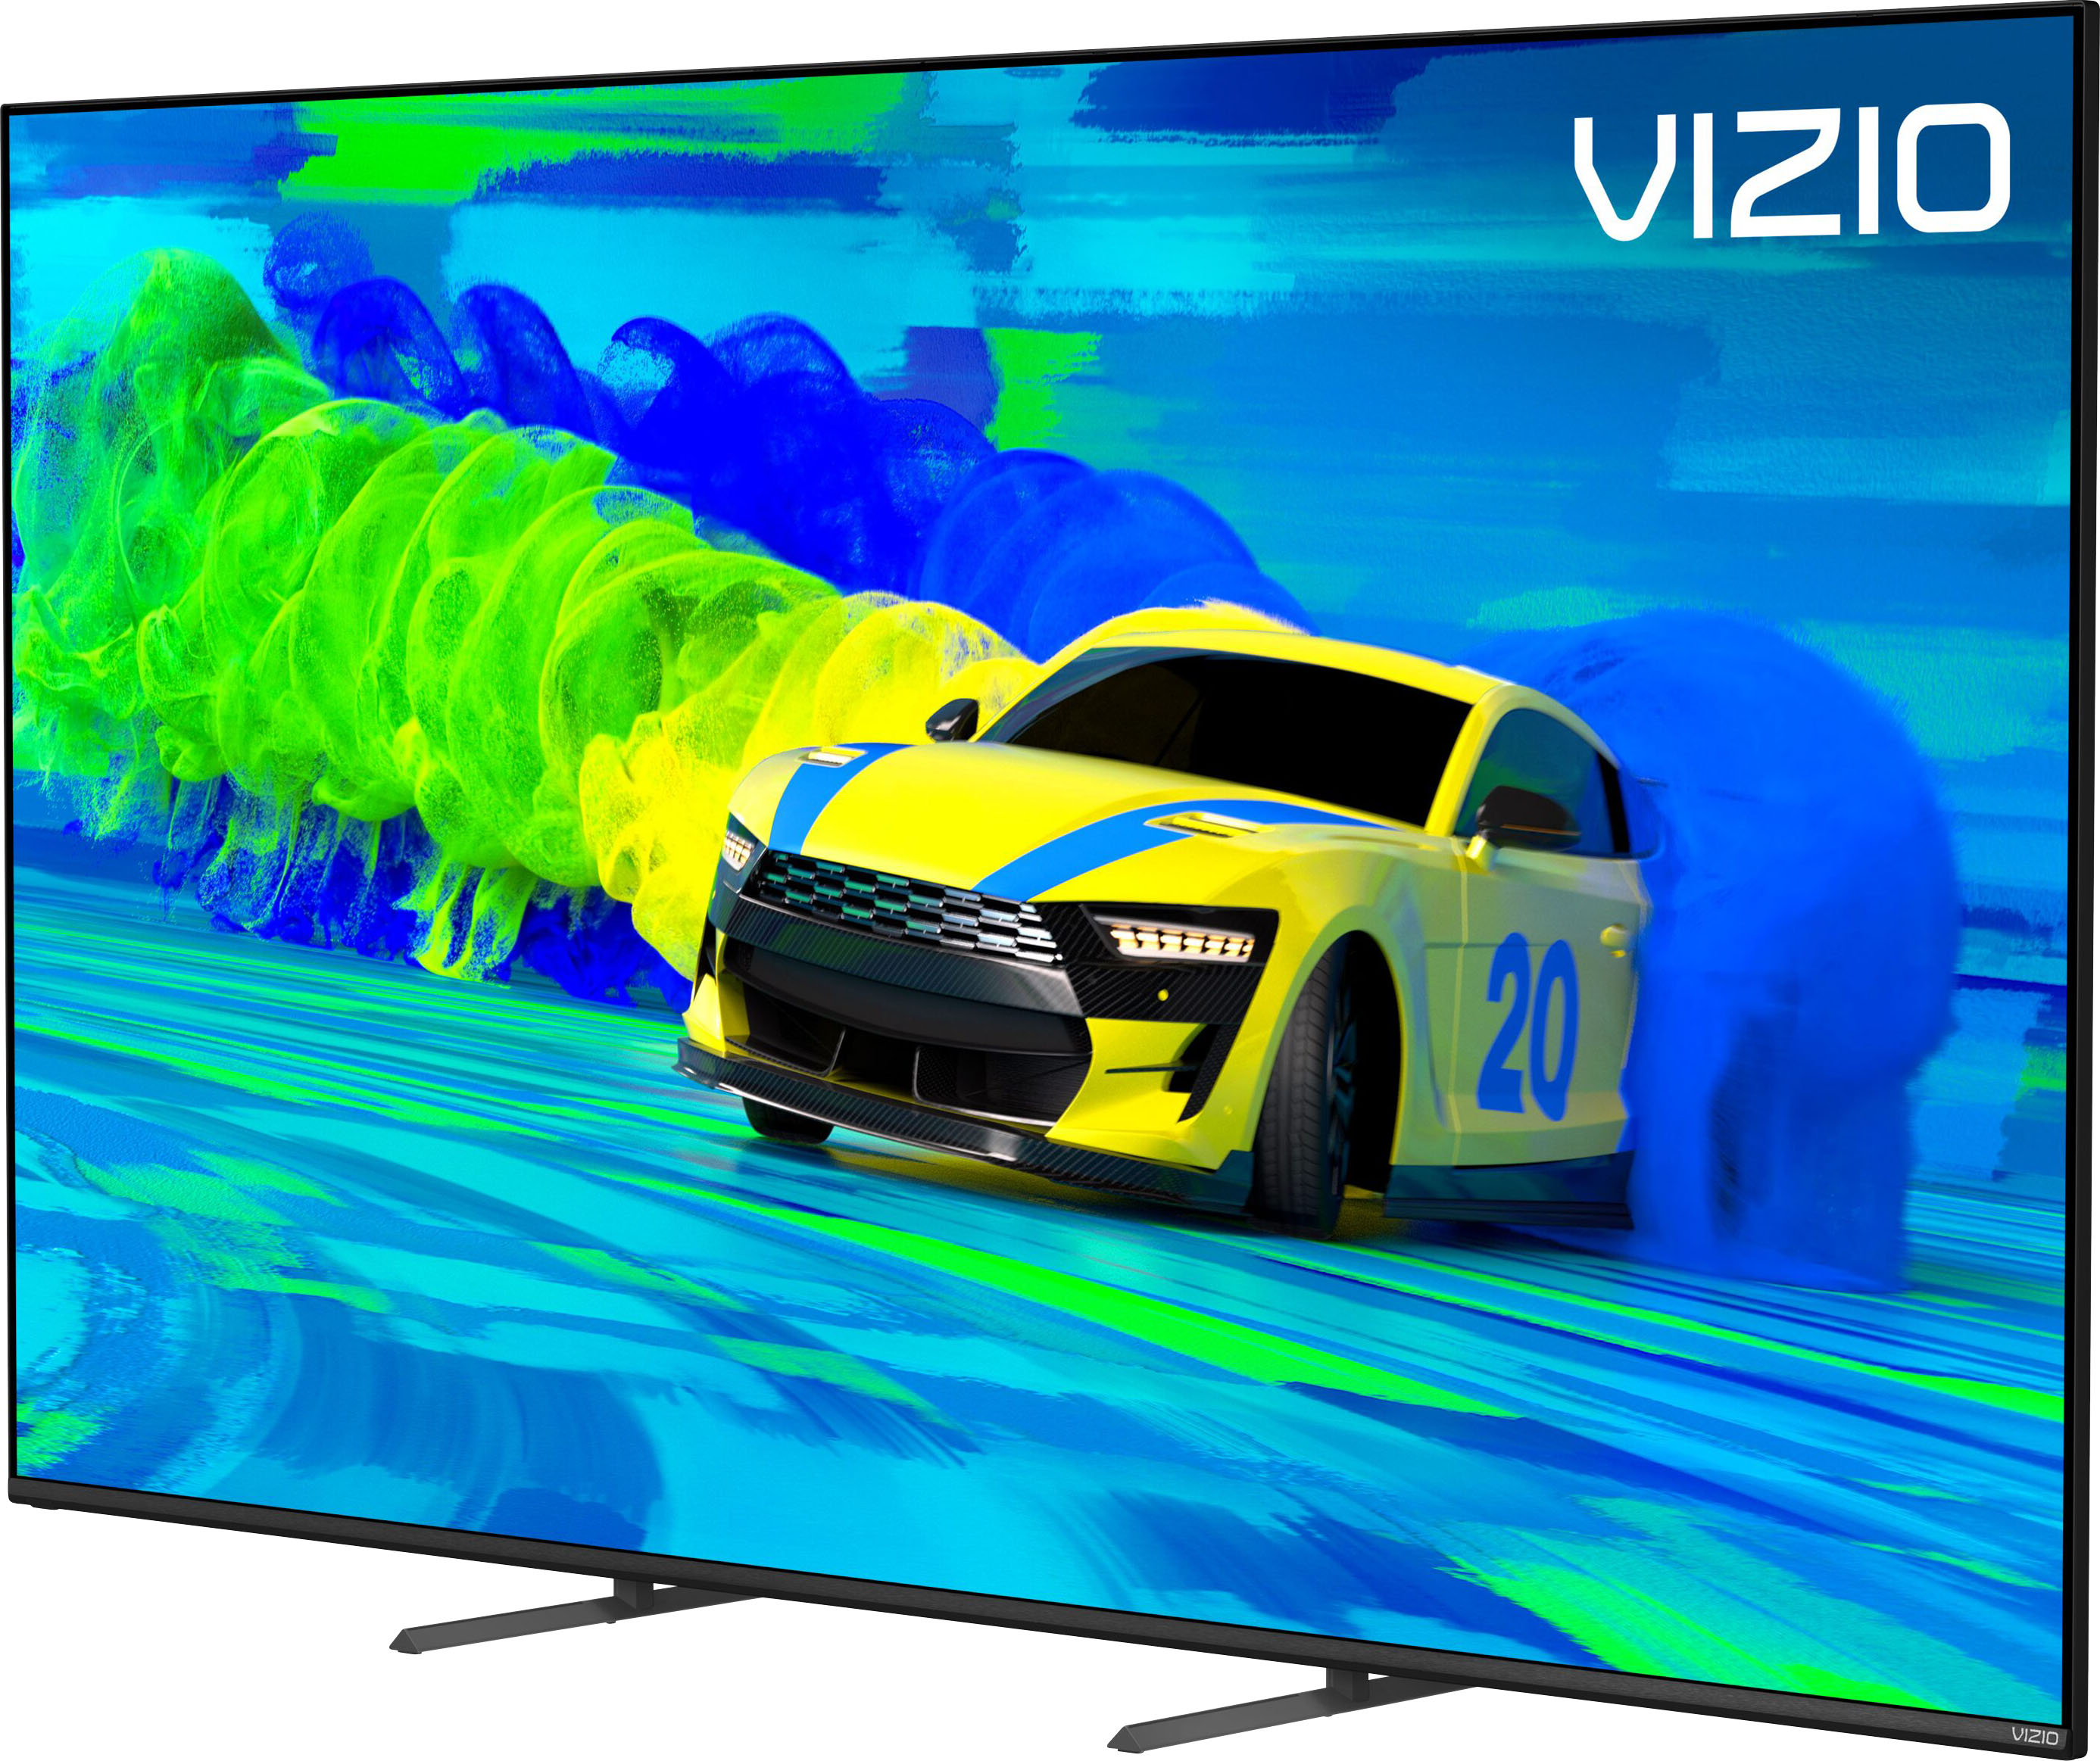 Vizio OLED 4K TV Review: great picture, great price - Reviewed